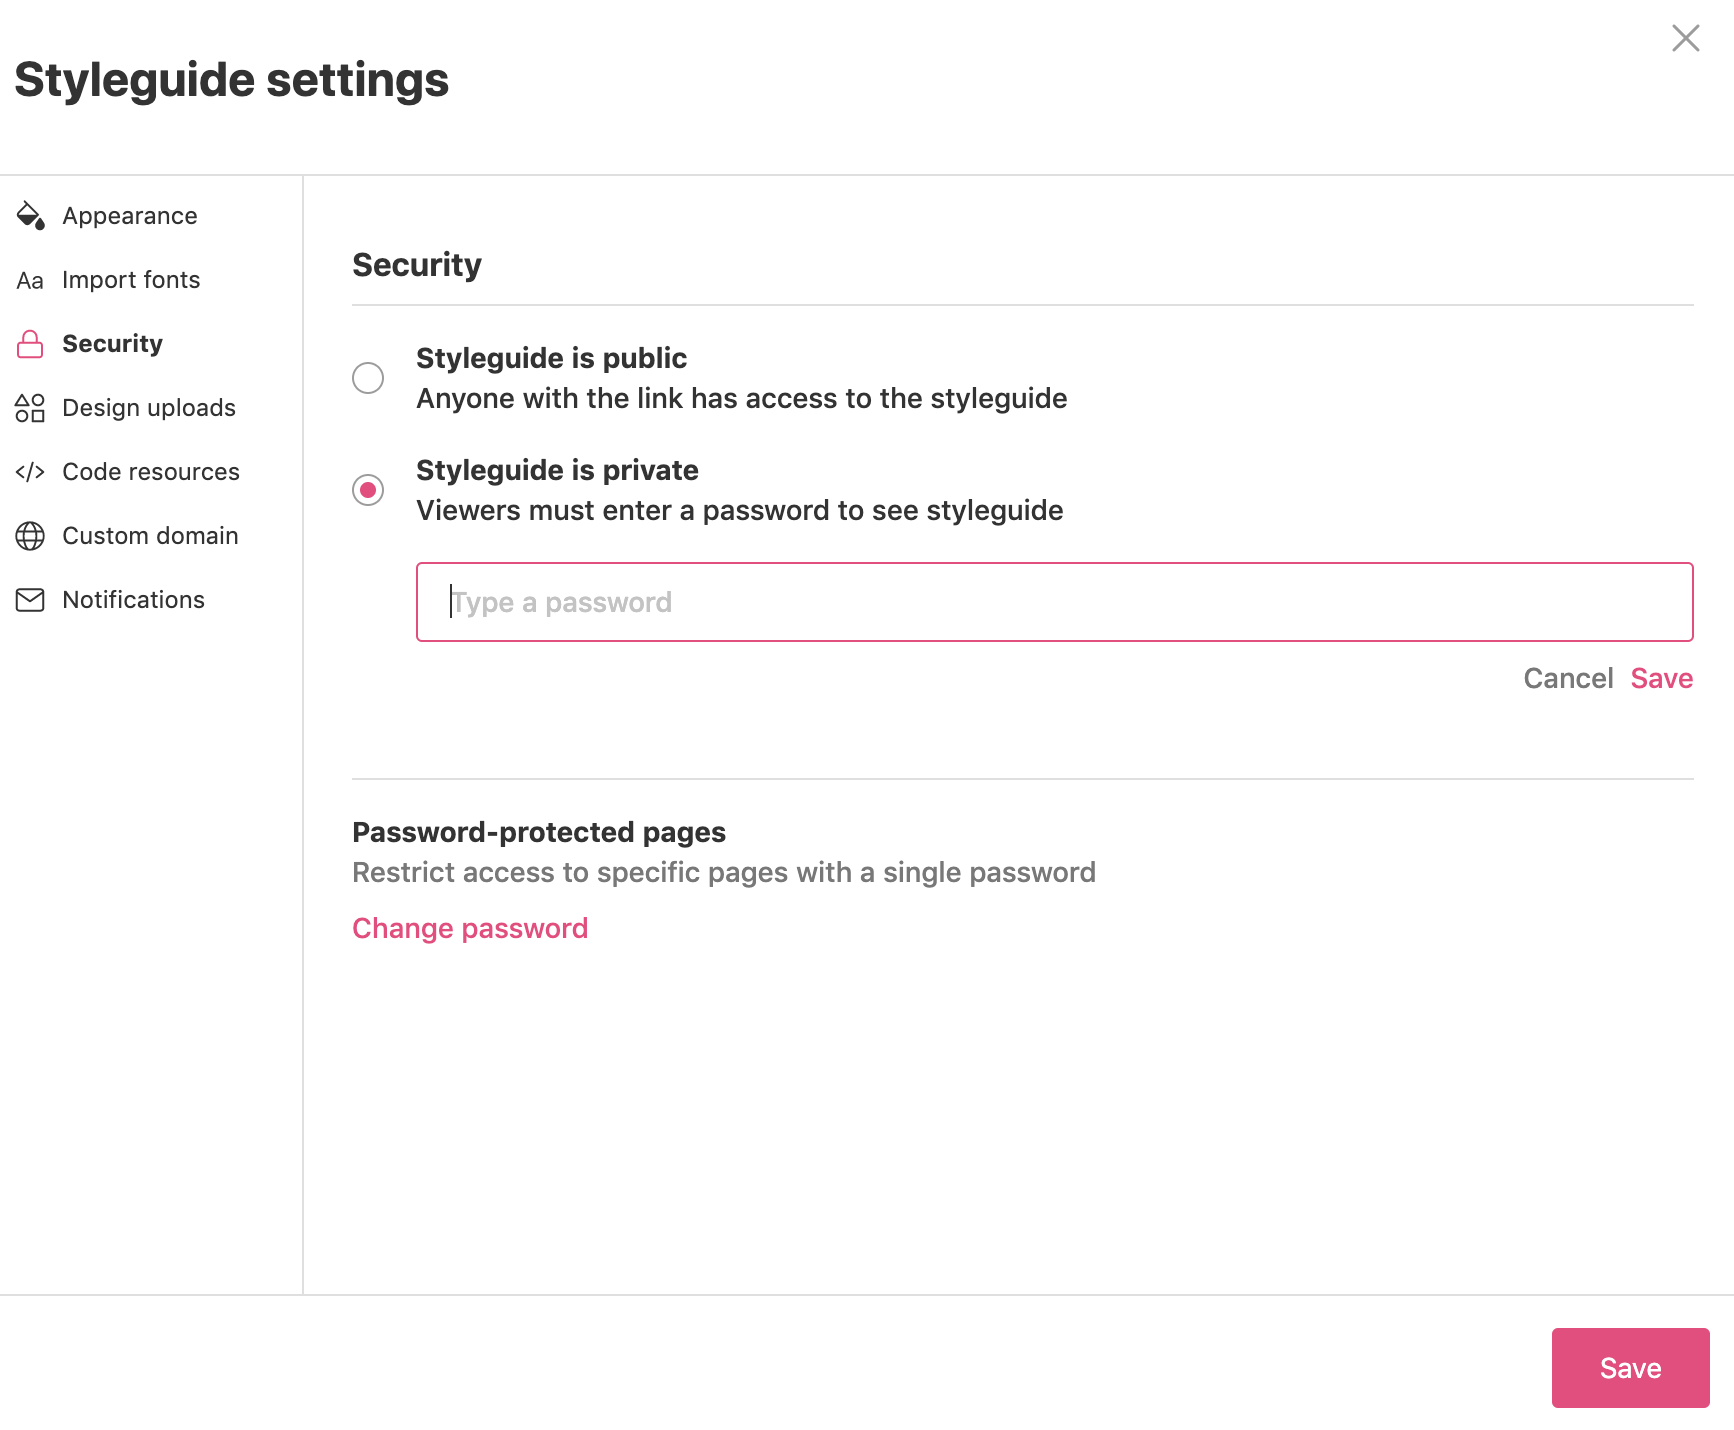 Styleguide is private option is selected in the Security section in the Styleguide settings